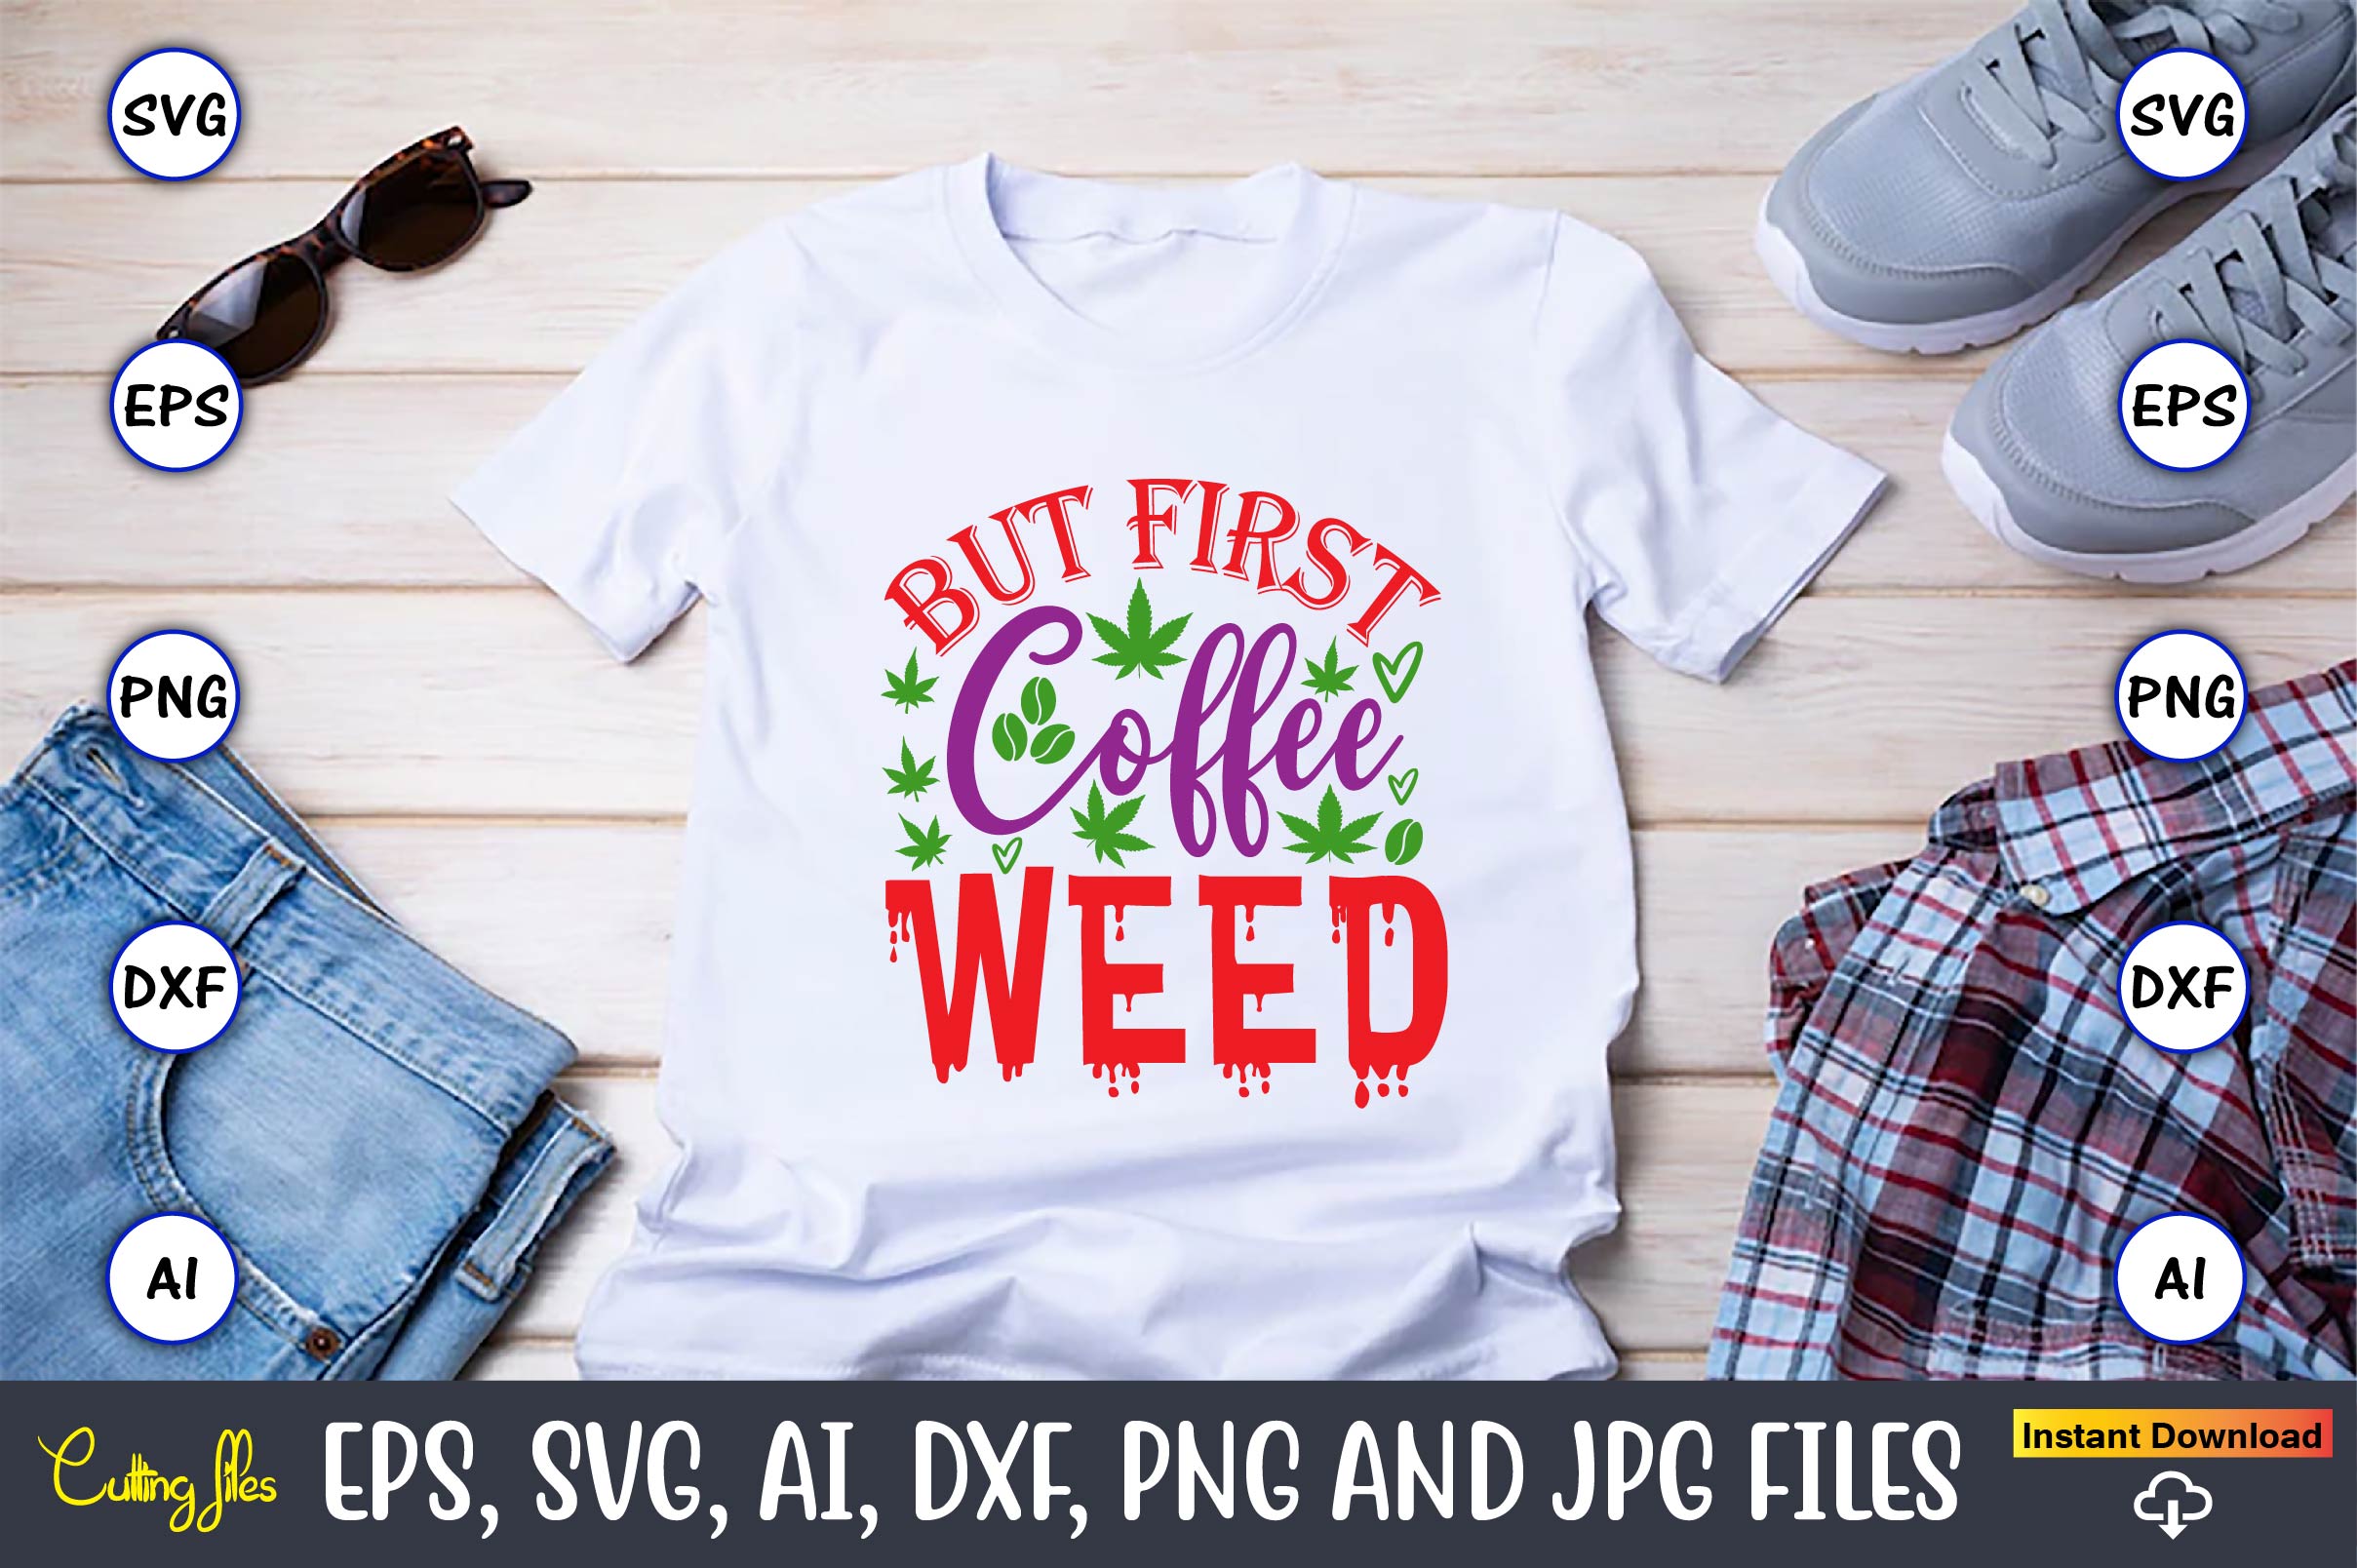 Image of a white T-shirt with a colorful inscription But first coffee weed.